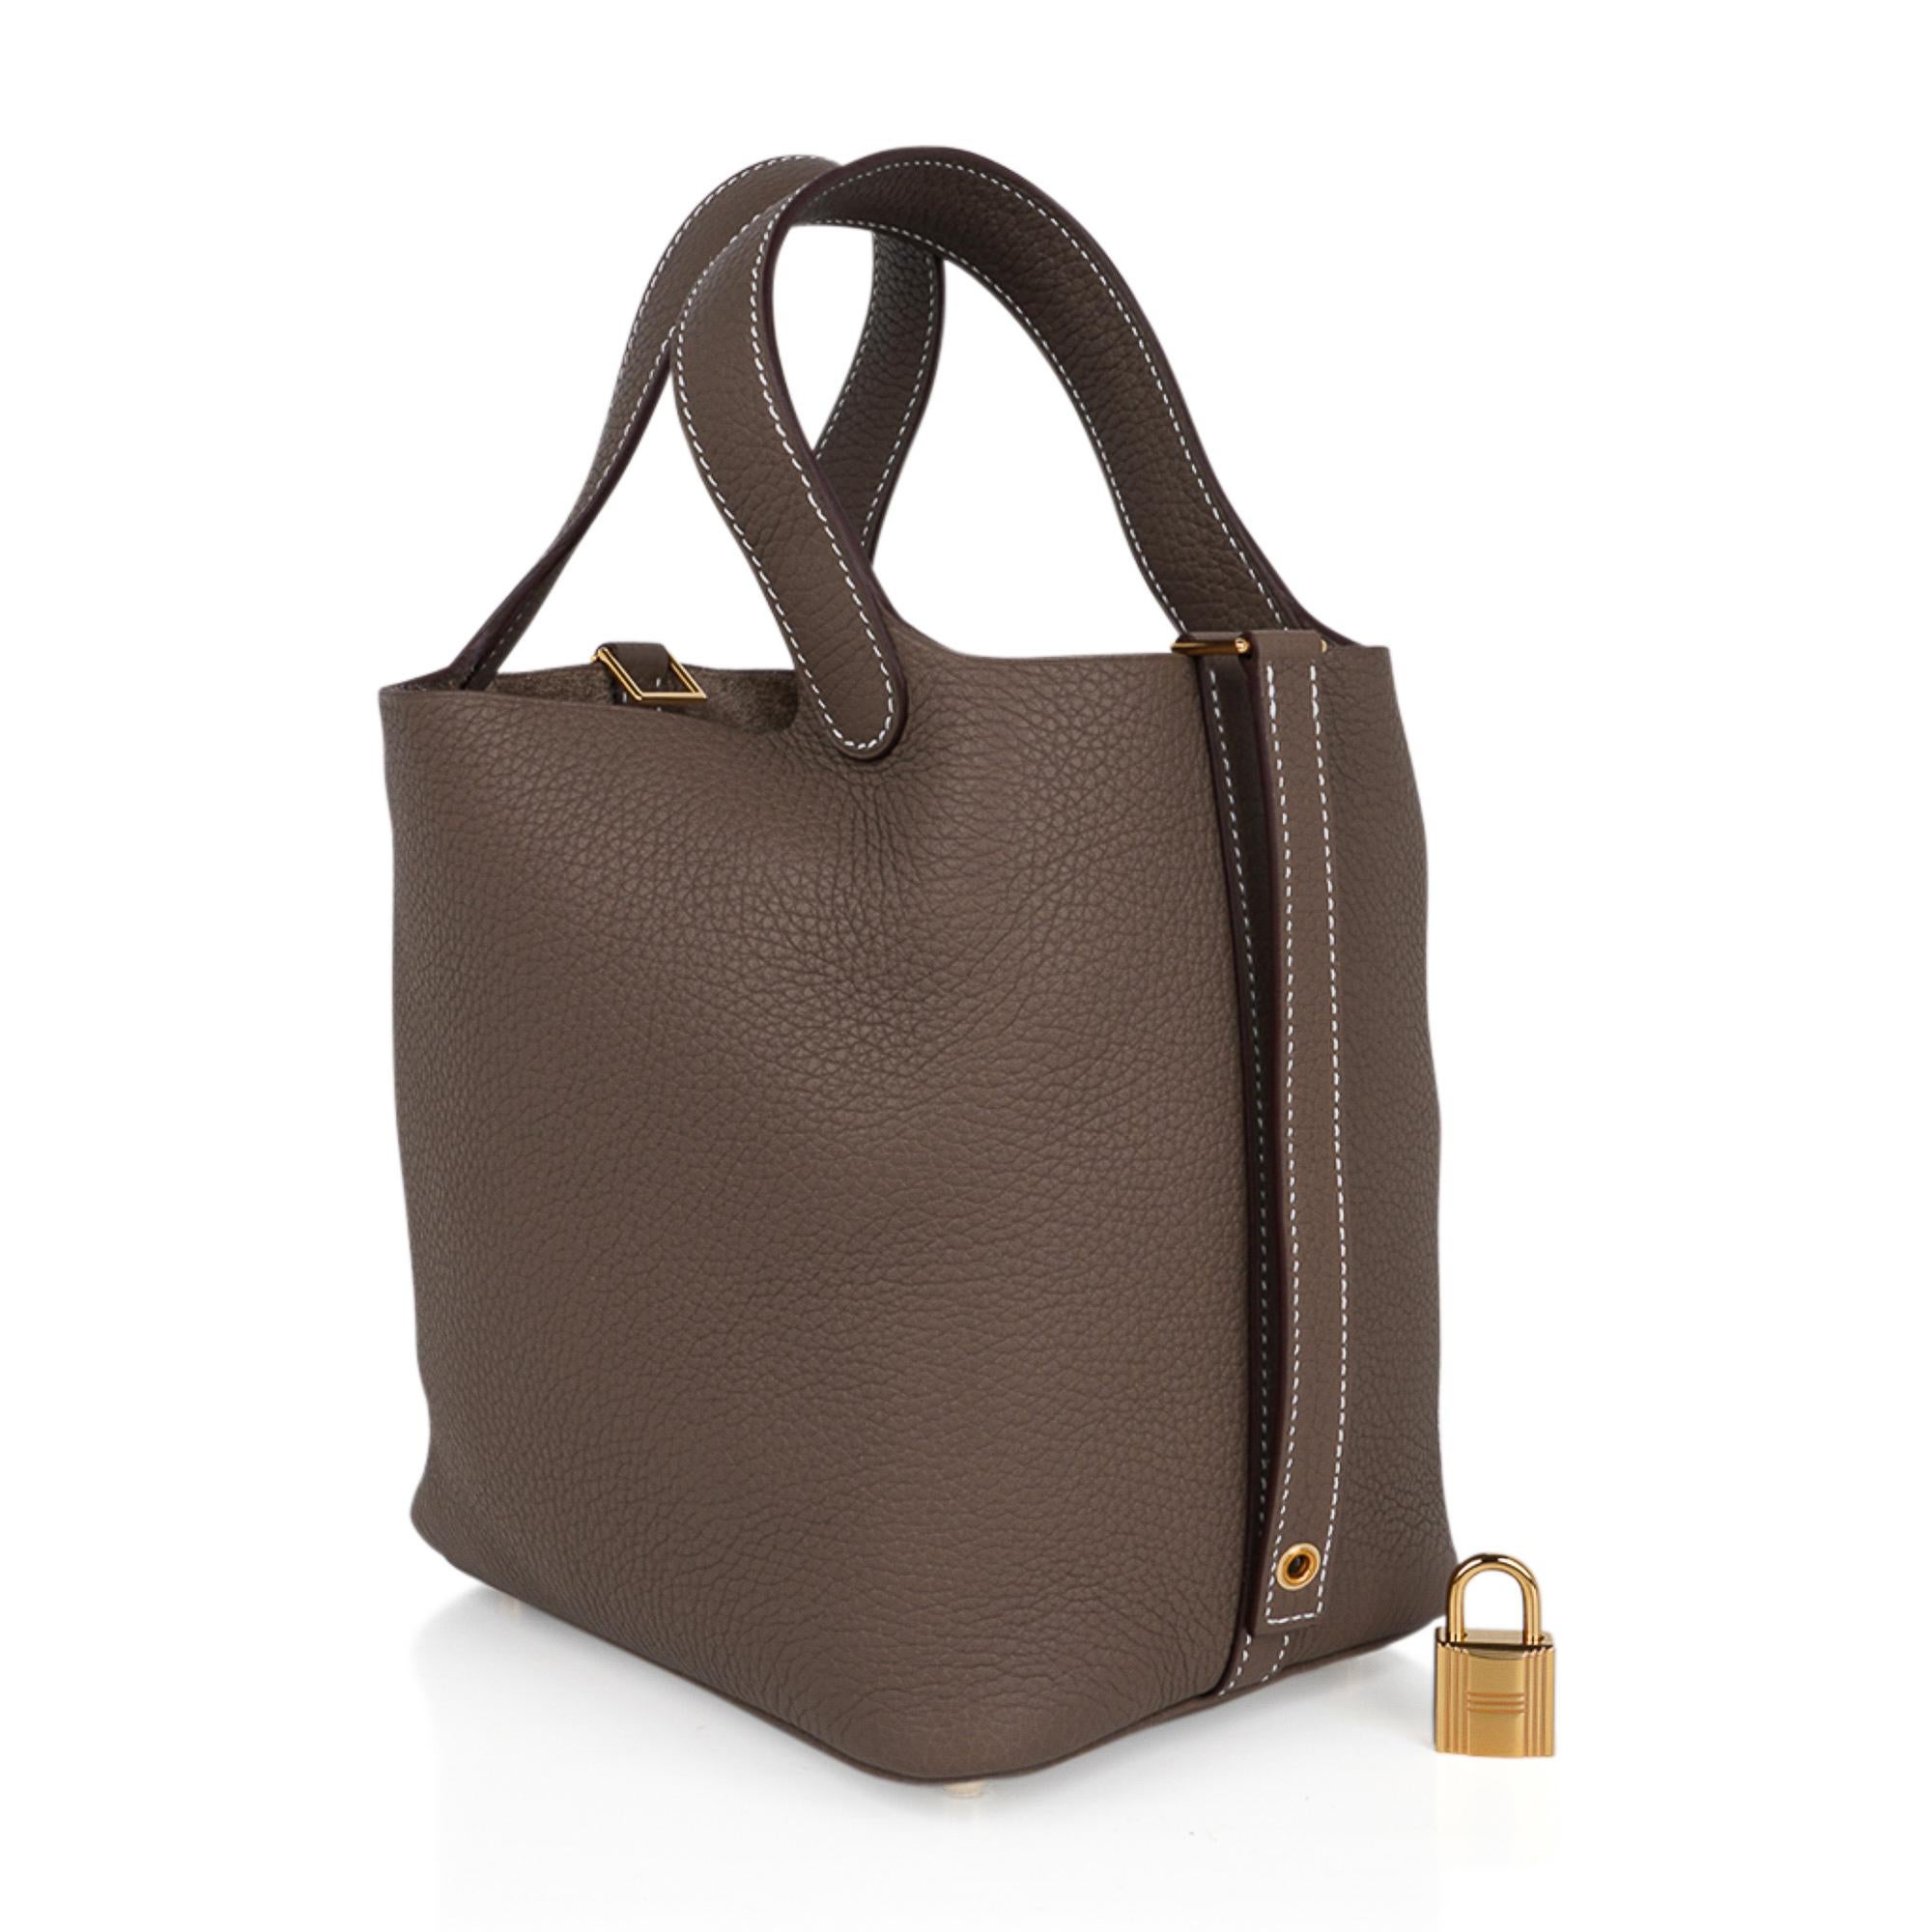 Mightychic offers an Hermes Picotin Lock 18 bag featured in featured in neutral Etoupe.
Warmed with Gold hardware.
Clemence leather.
This roomy small tote is a perfect go to bag! 
Comes with lock and keys, sleeper, and signature Hermes box.
NEW or